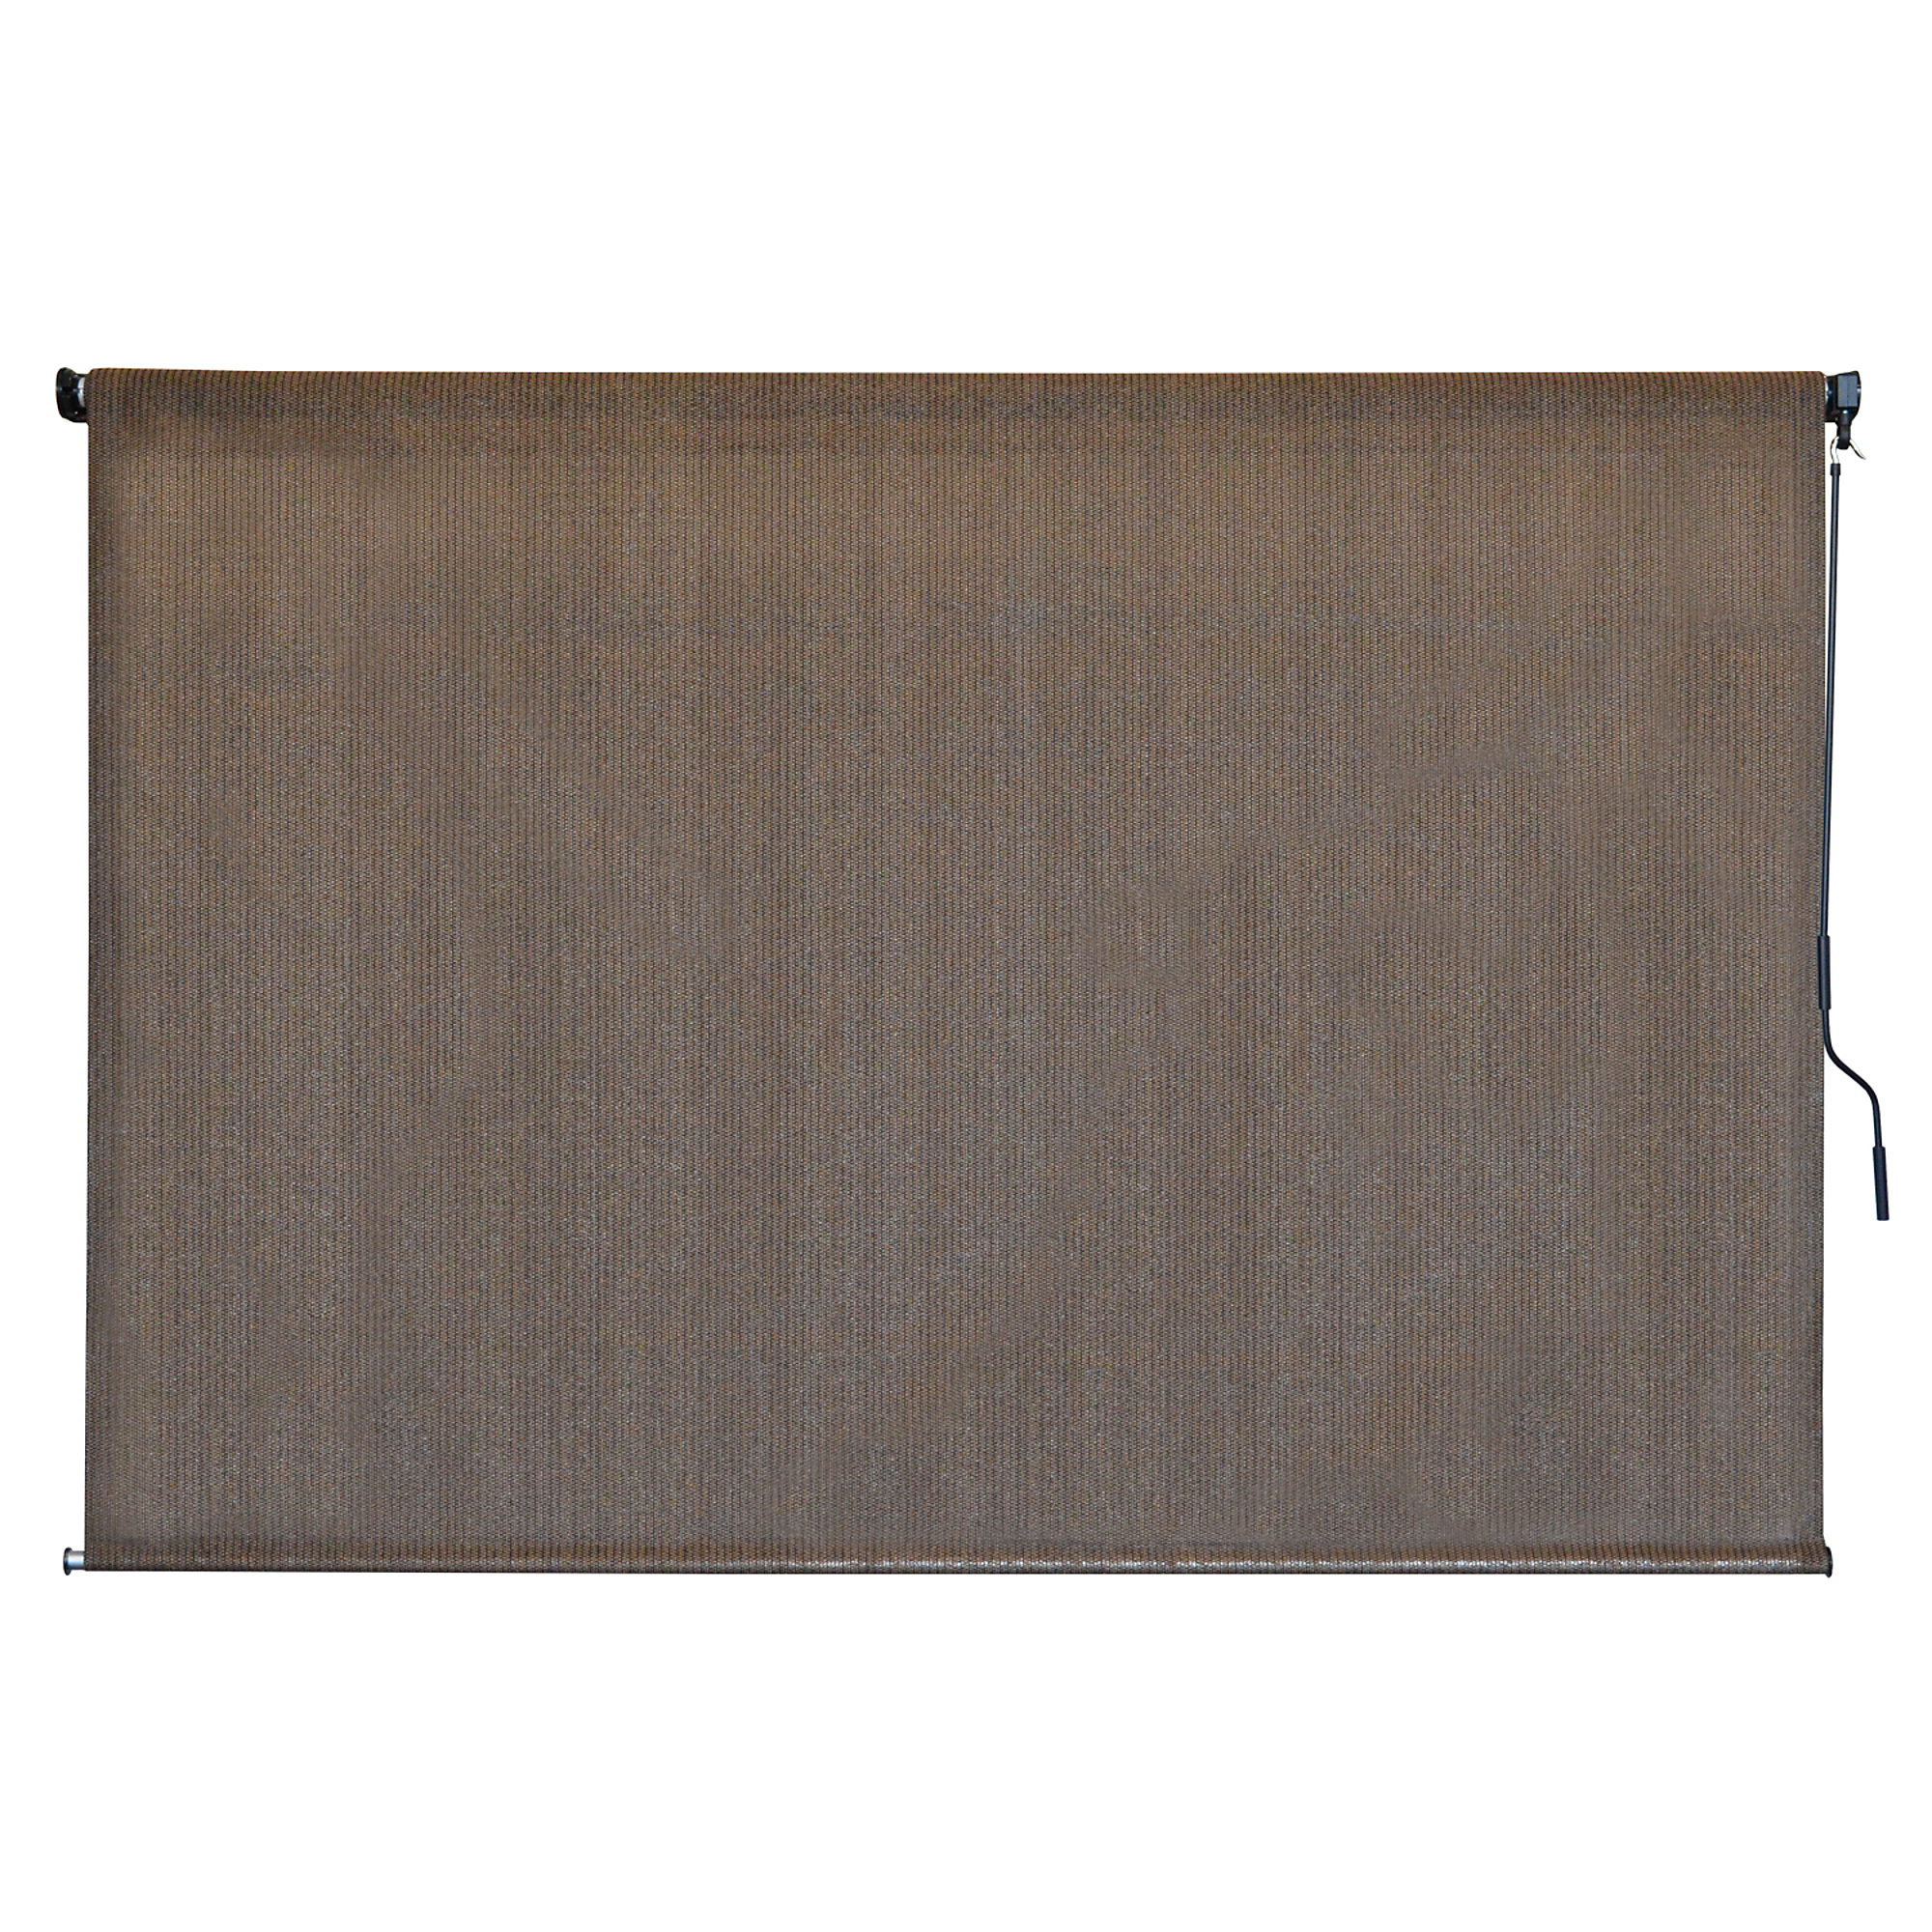 Shade Champ, Outdoor Sun Shade, Width 84 in, Length 72 in, Material Polyethylene, Model 20NT76